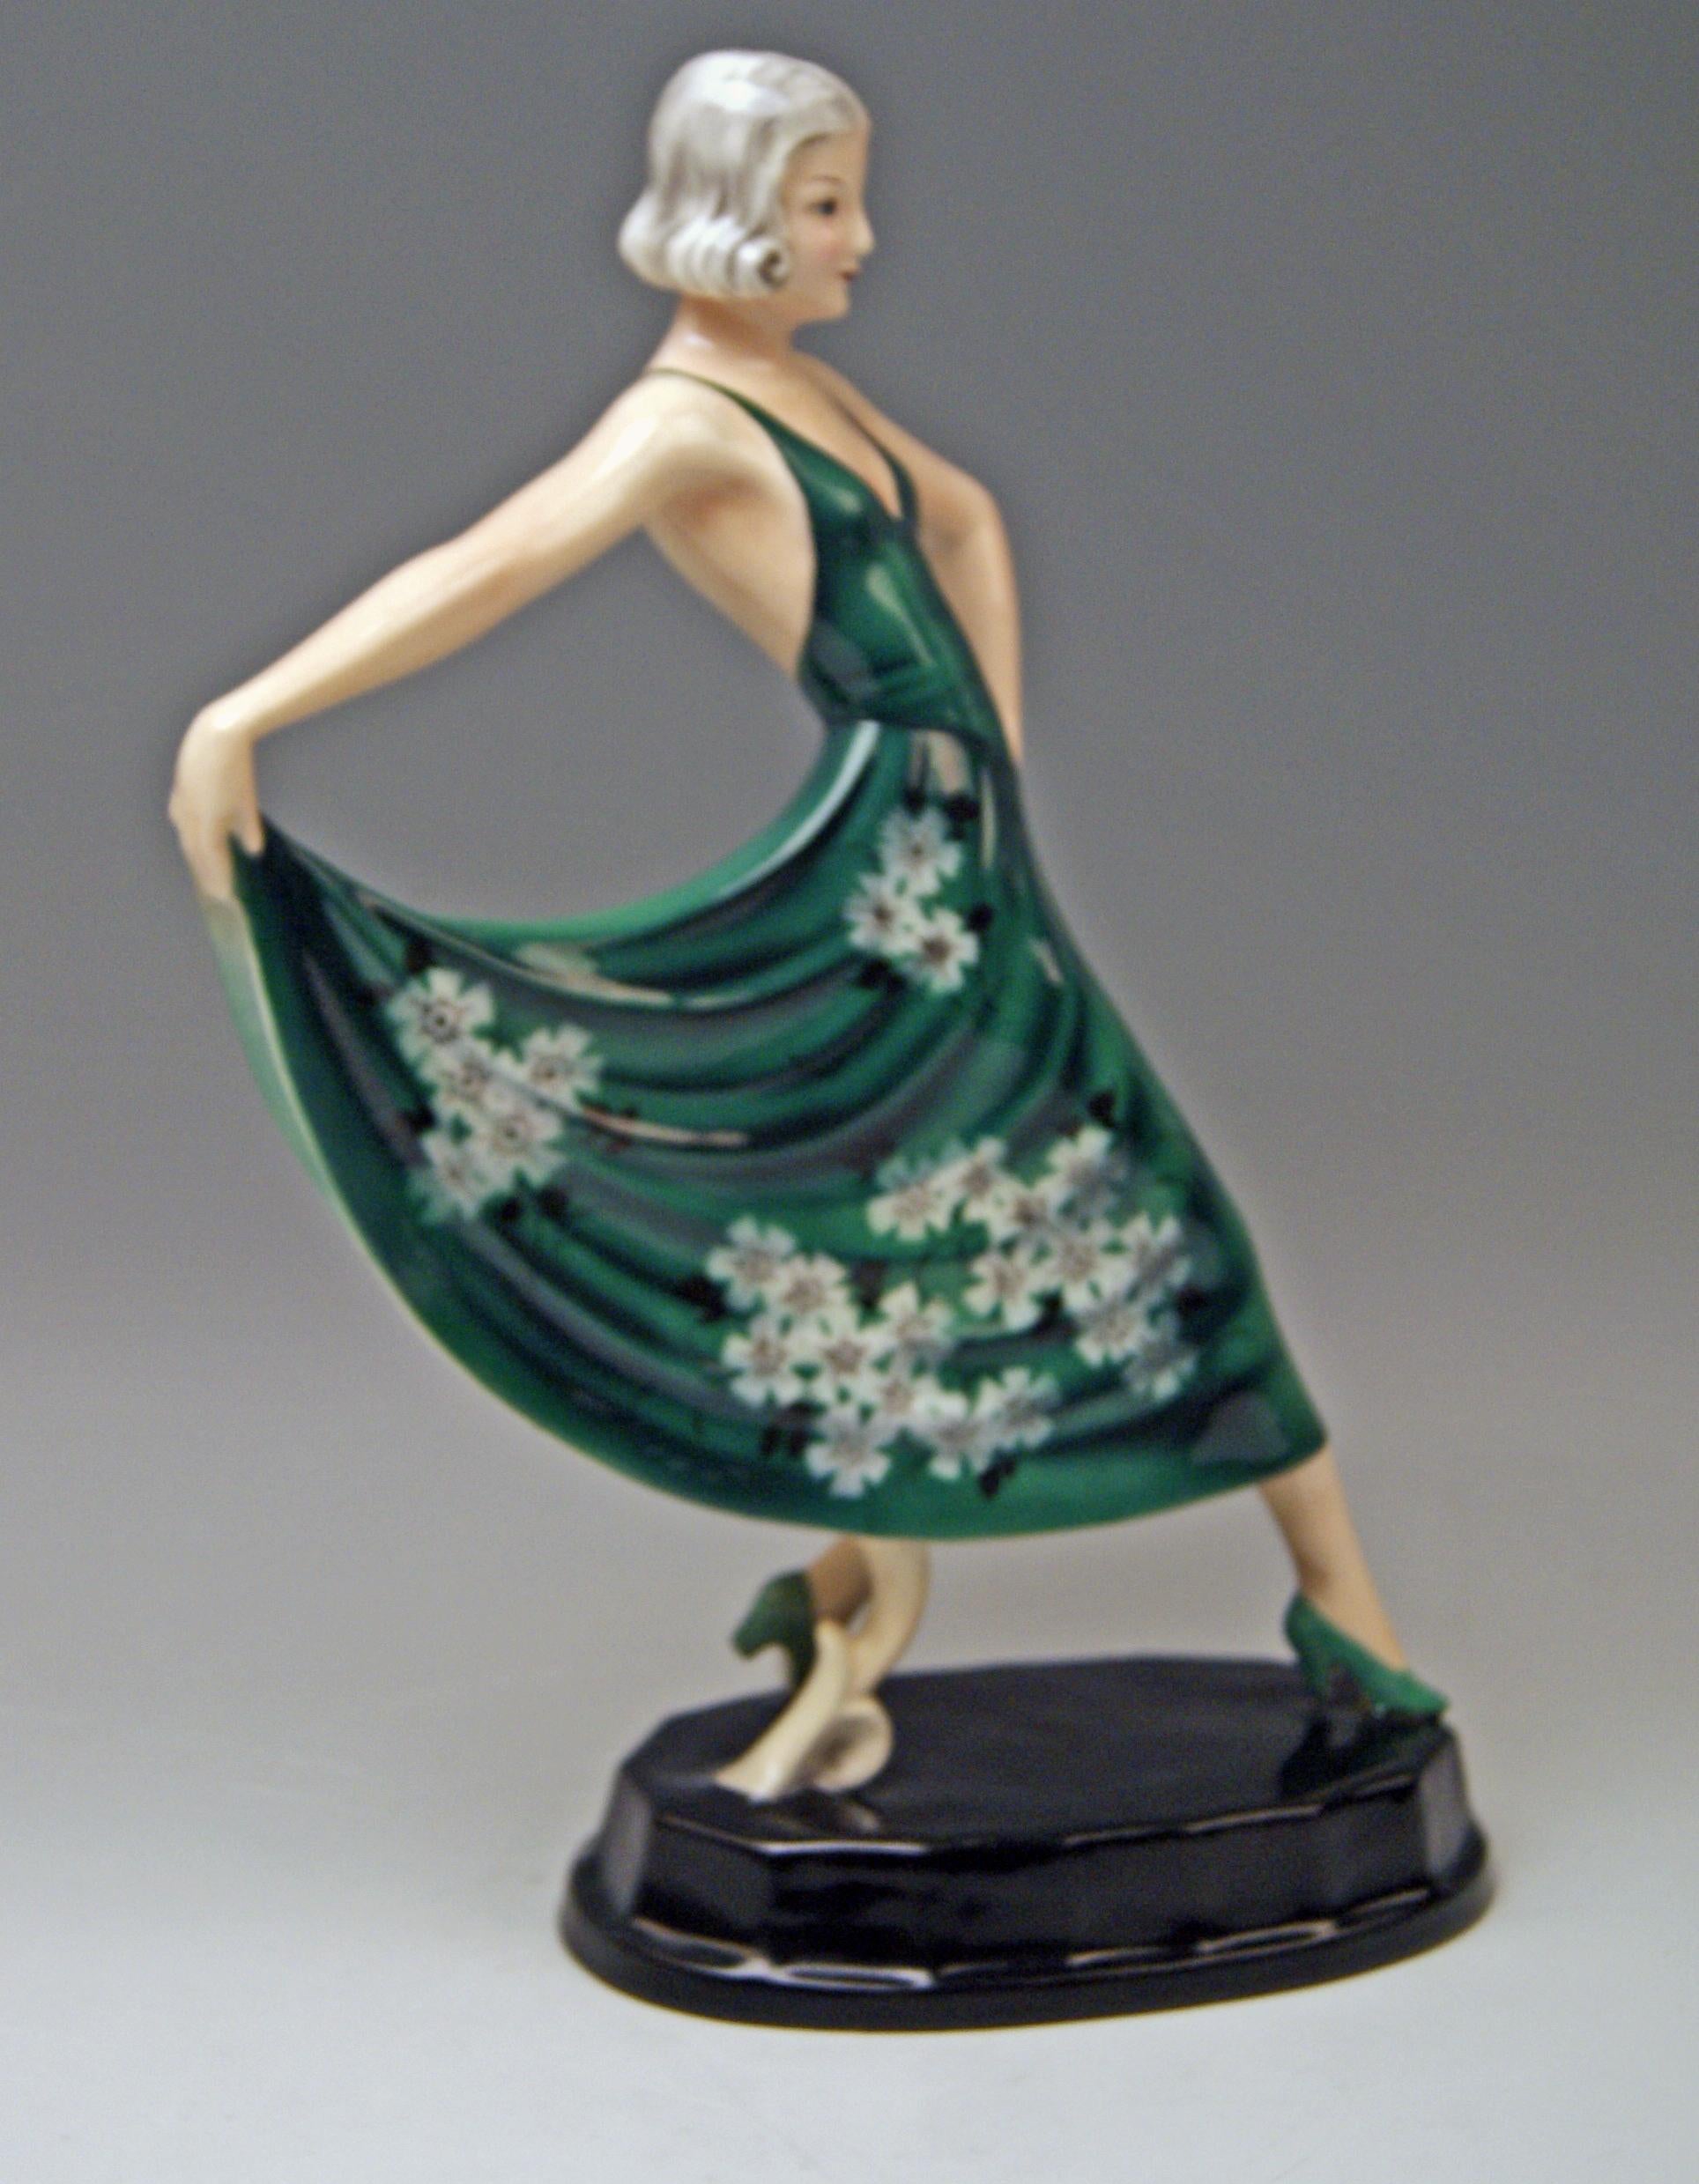 Goldscheider Vienna lady dancer.

Designed circa 1935-1936 by Stephan Dakon (1904-1997).
made circa 1936-1937
model number 6754 / 60 / 19
painter's and modeller's signs & signature 'Dakon' at reverse side of base existing / additionally, the